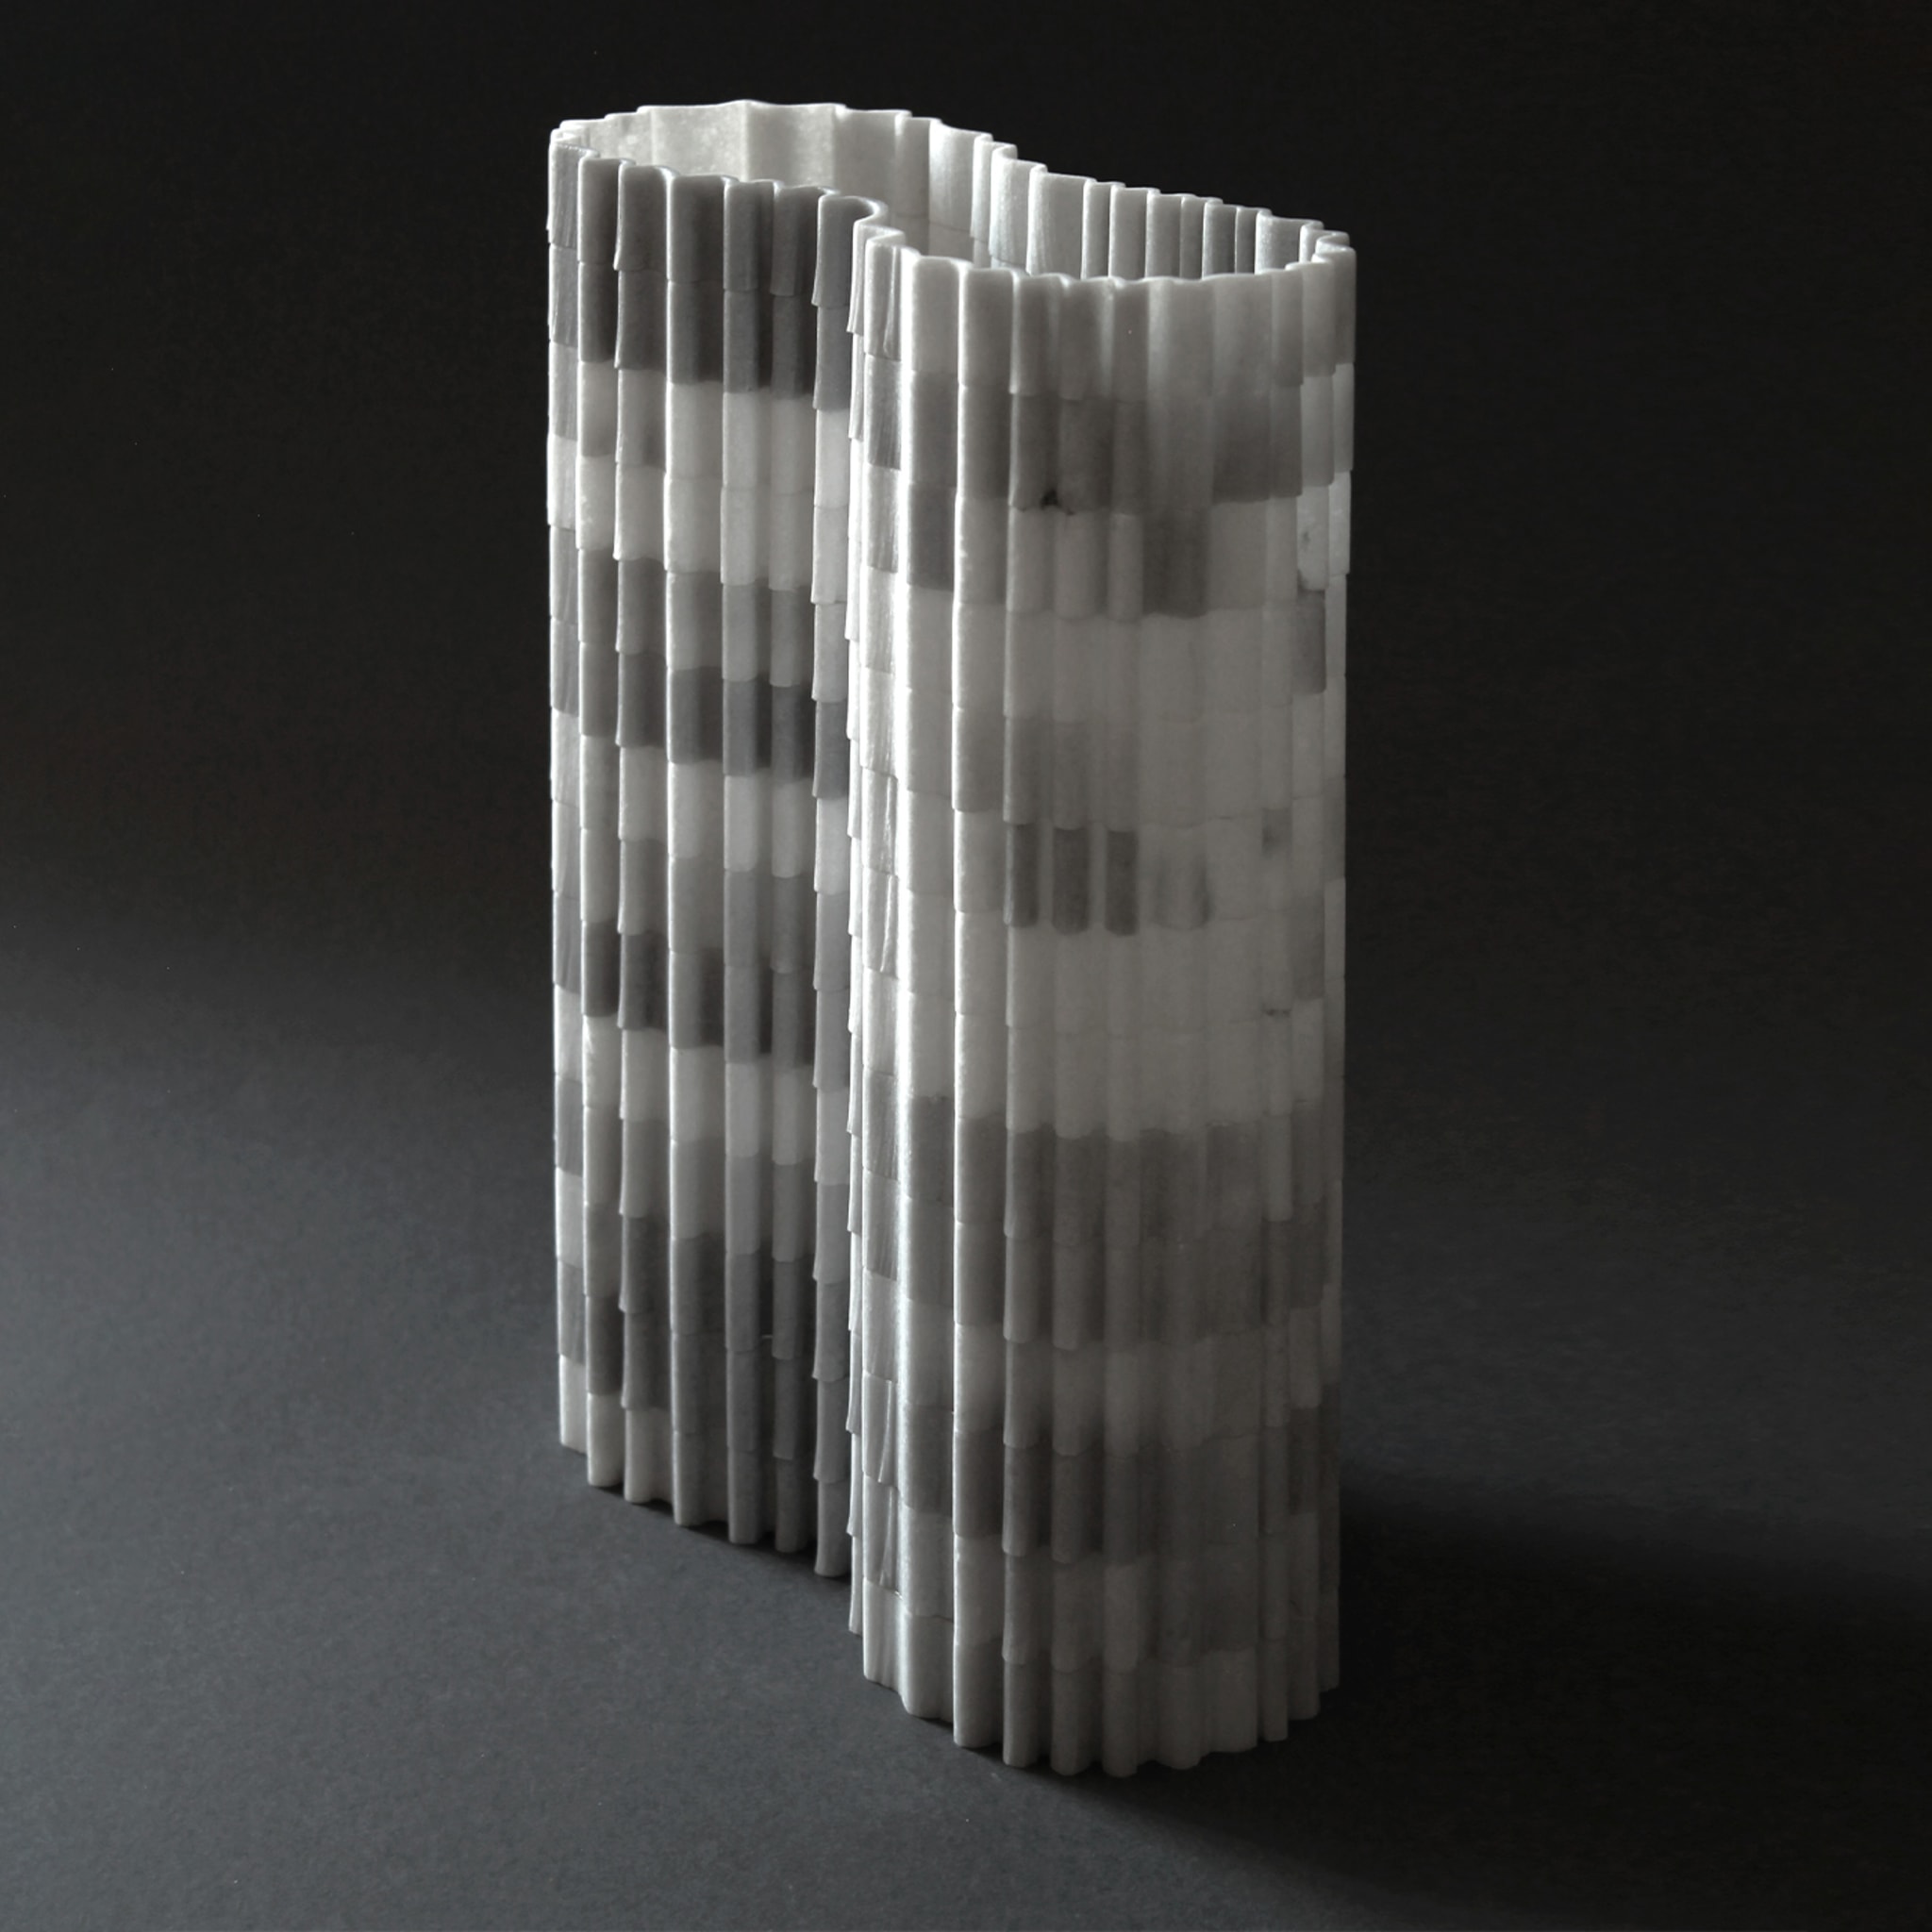 Stripes Vase Olimpic White Marble #1 by Paolo Ulian - Alternative view 3